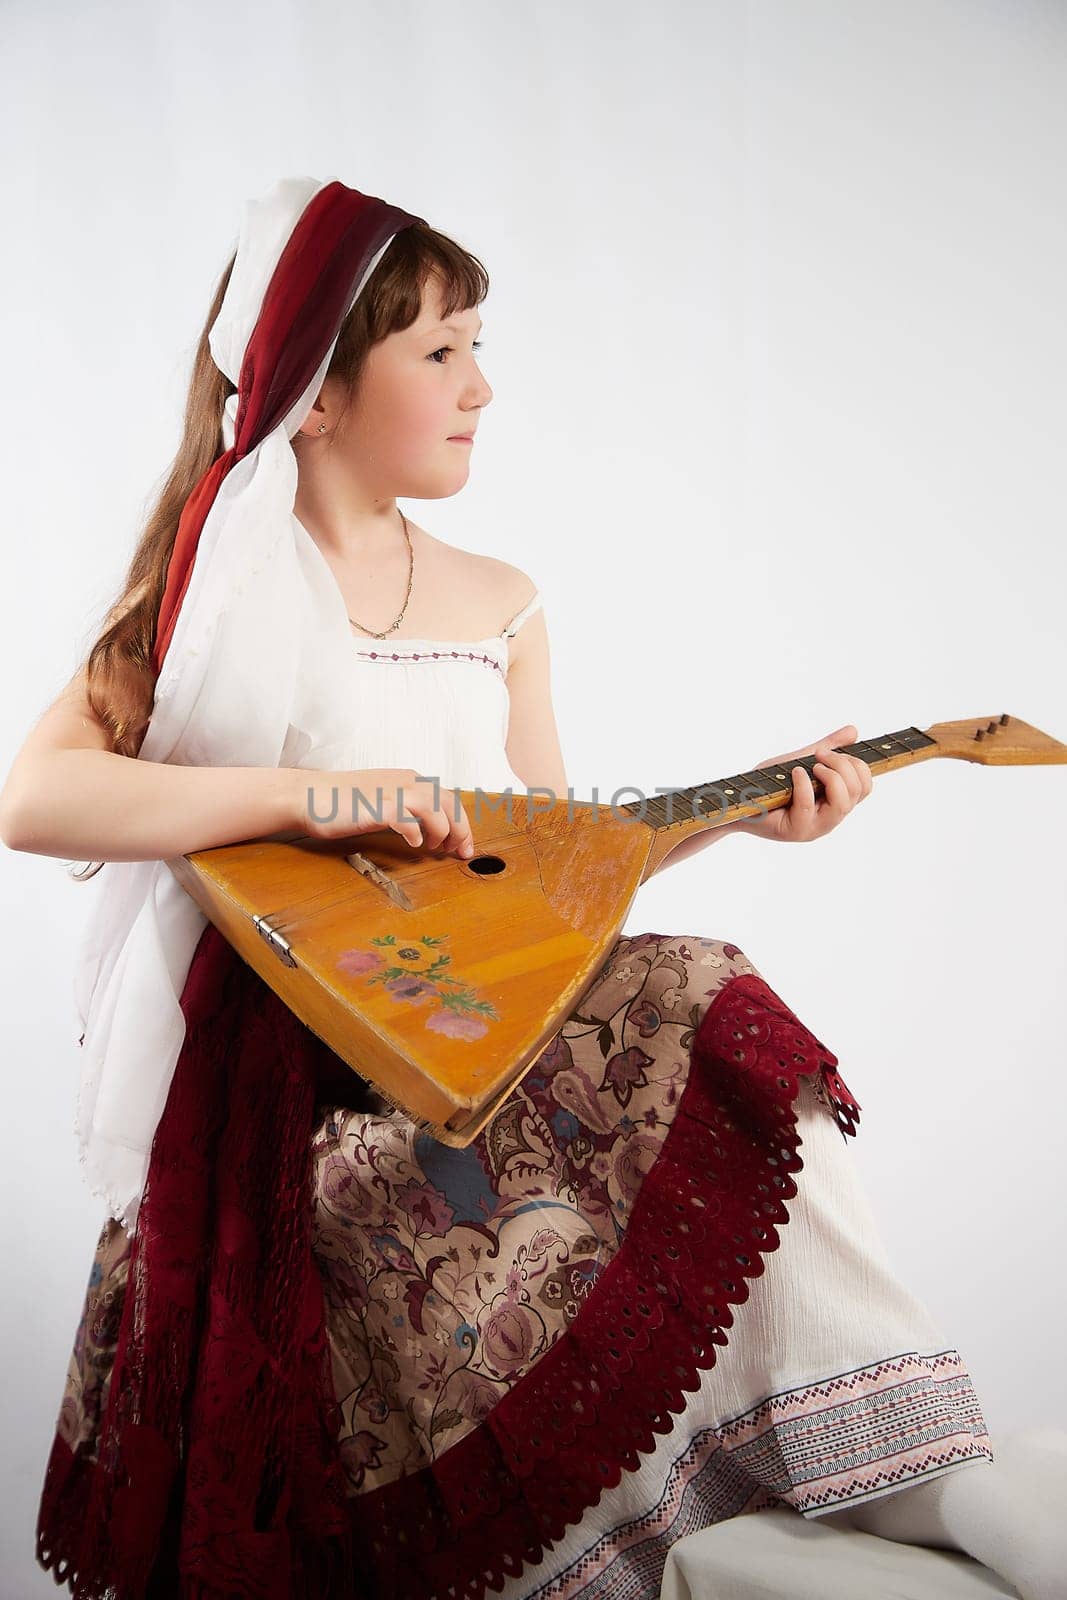 Portrait of Little girl in a stylized Tatar national costume with a musical instrument balalaika on a white background in the studio. Photo shoot of funny young teenager who is not professional model by keleny